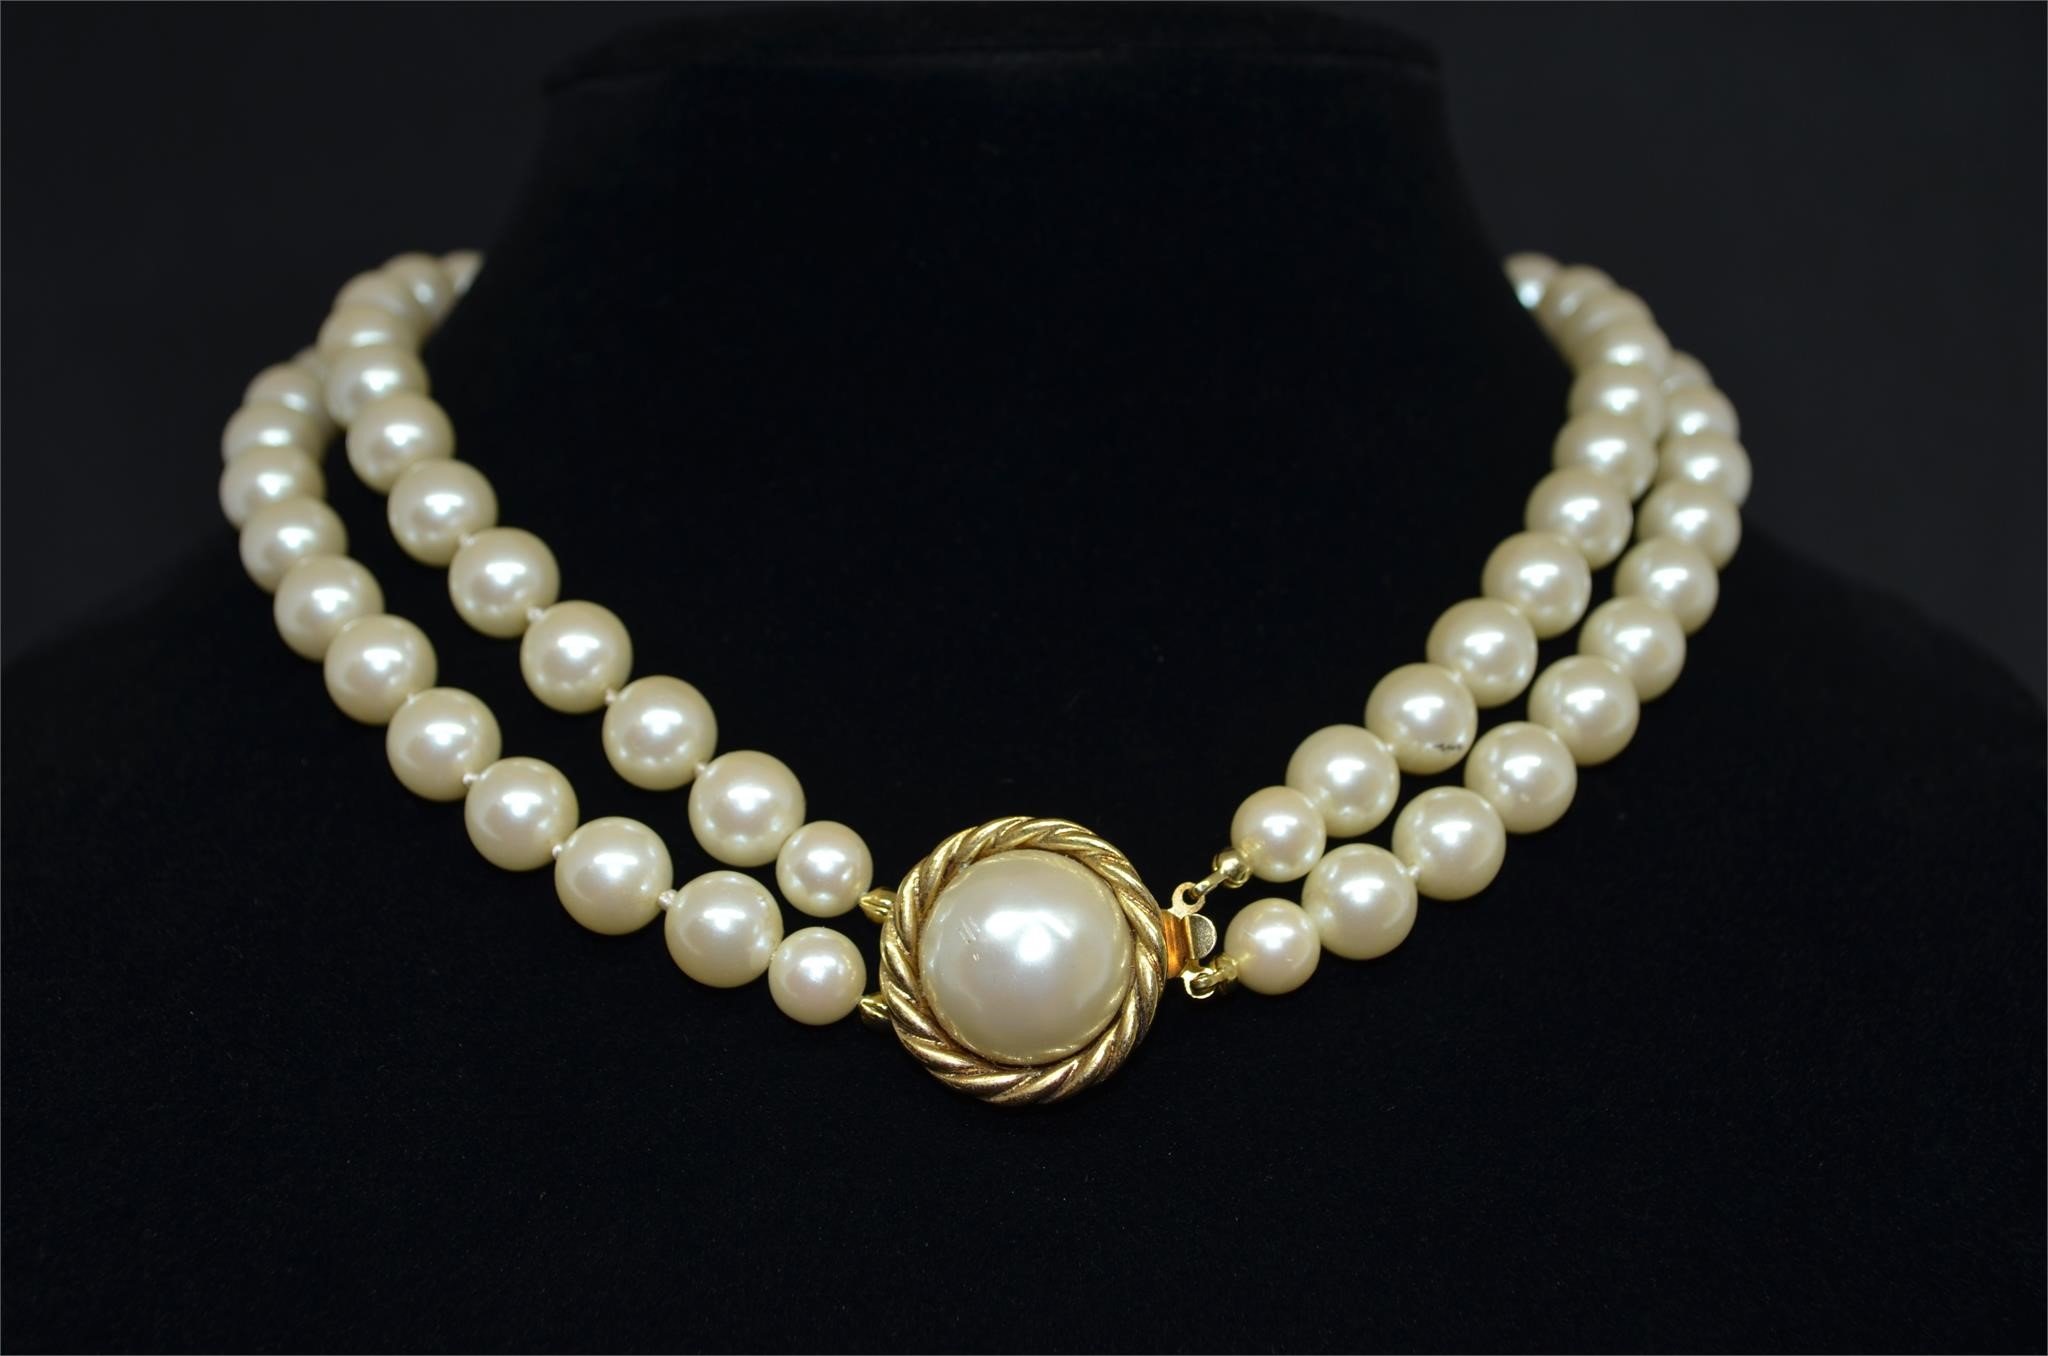 April Vintage Classic Jewelry Consignment Sale